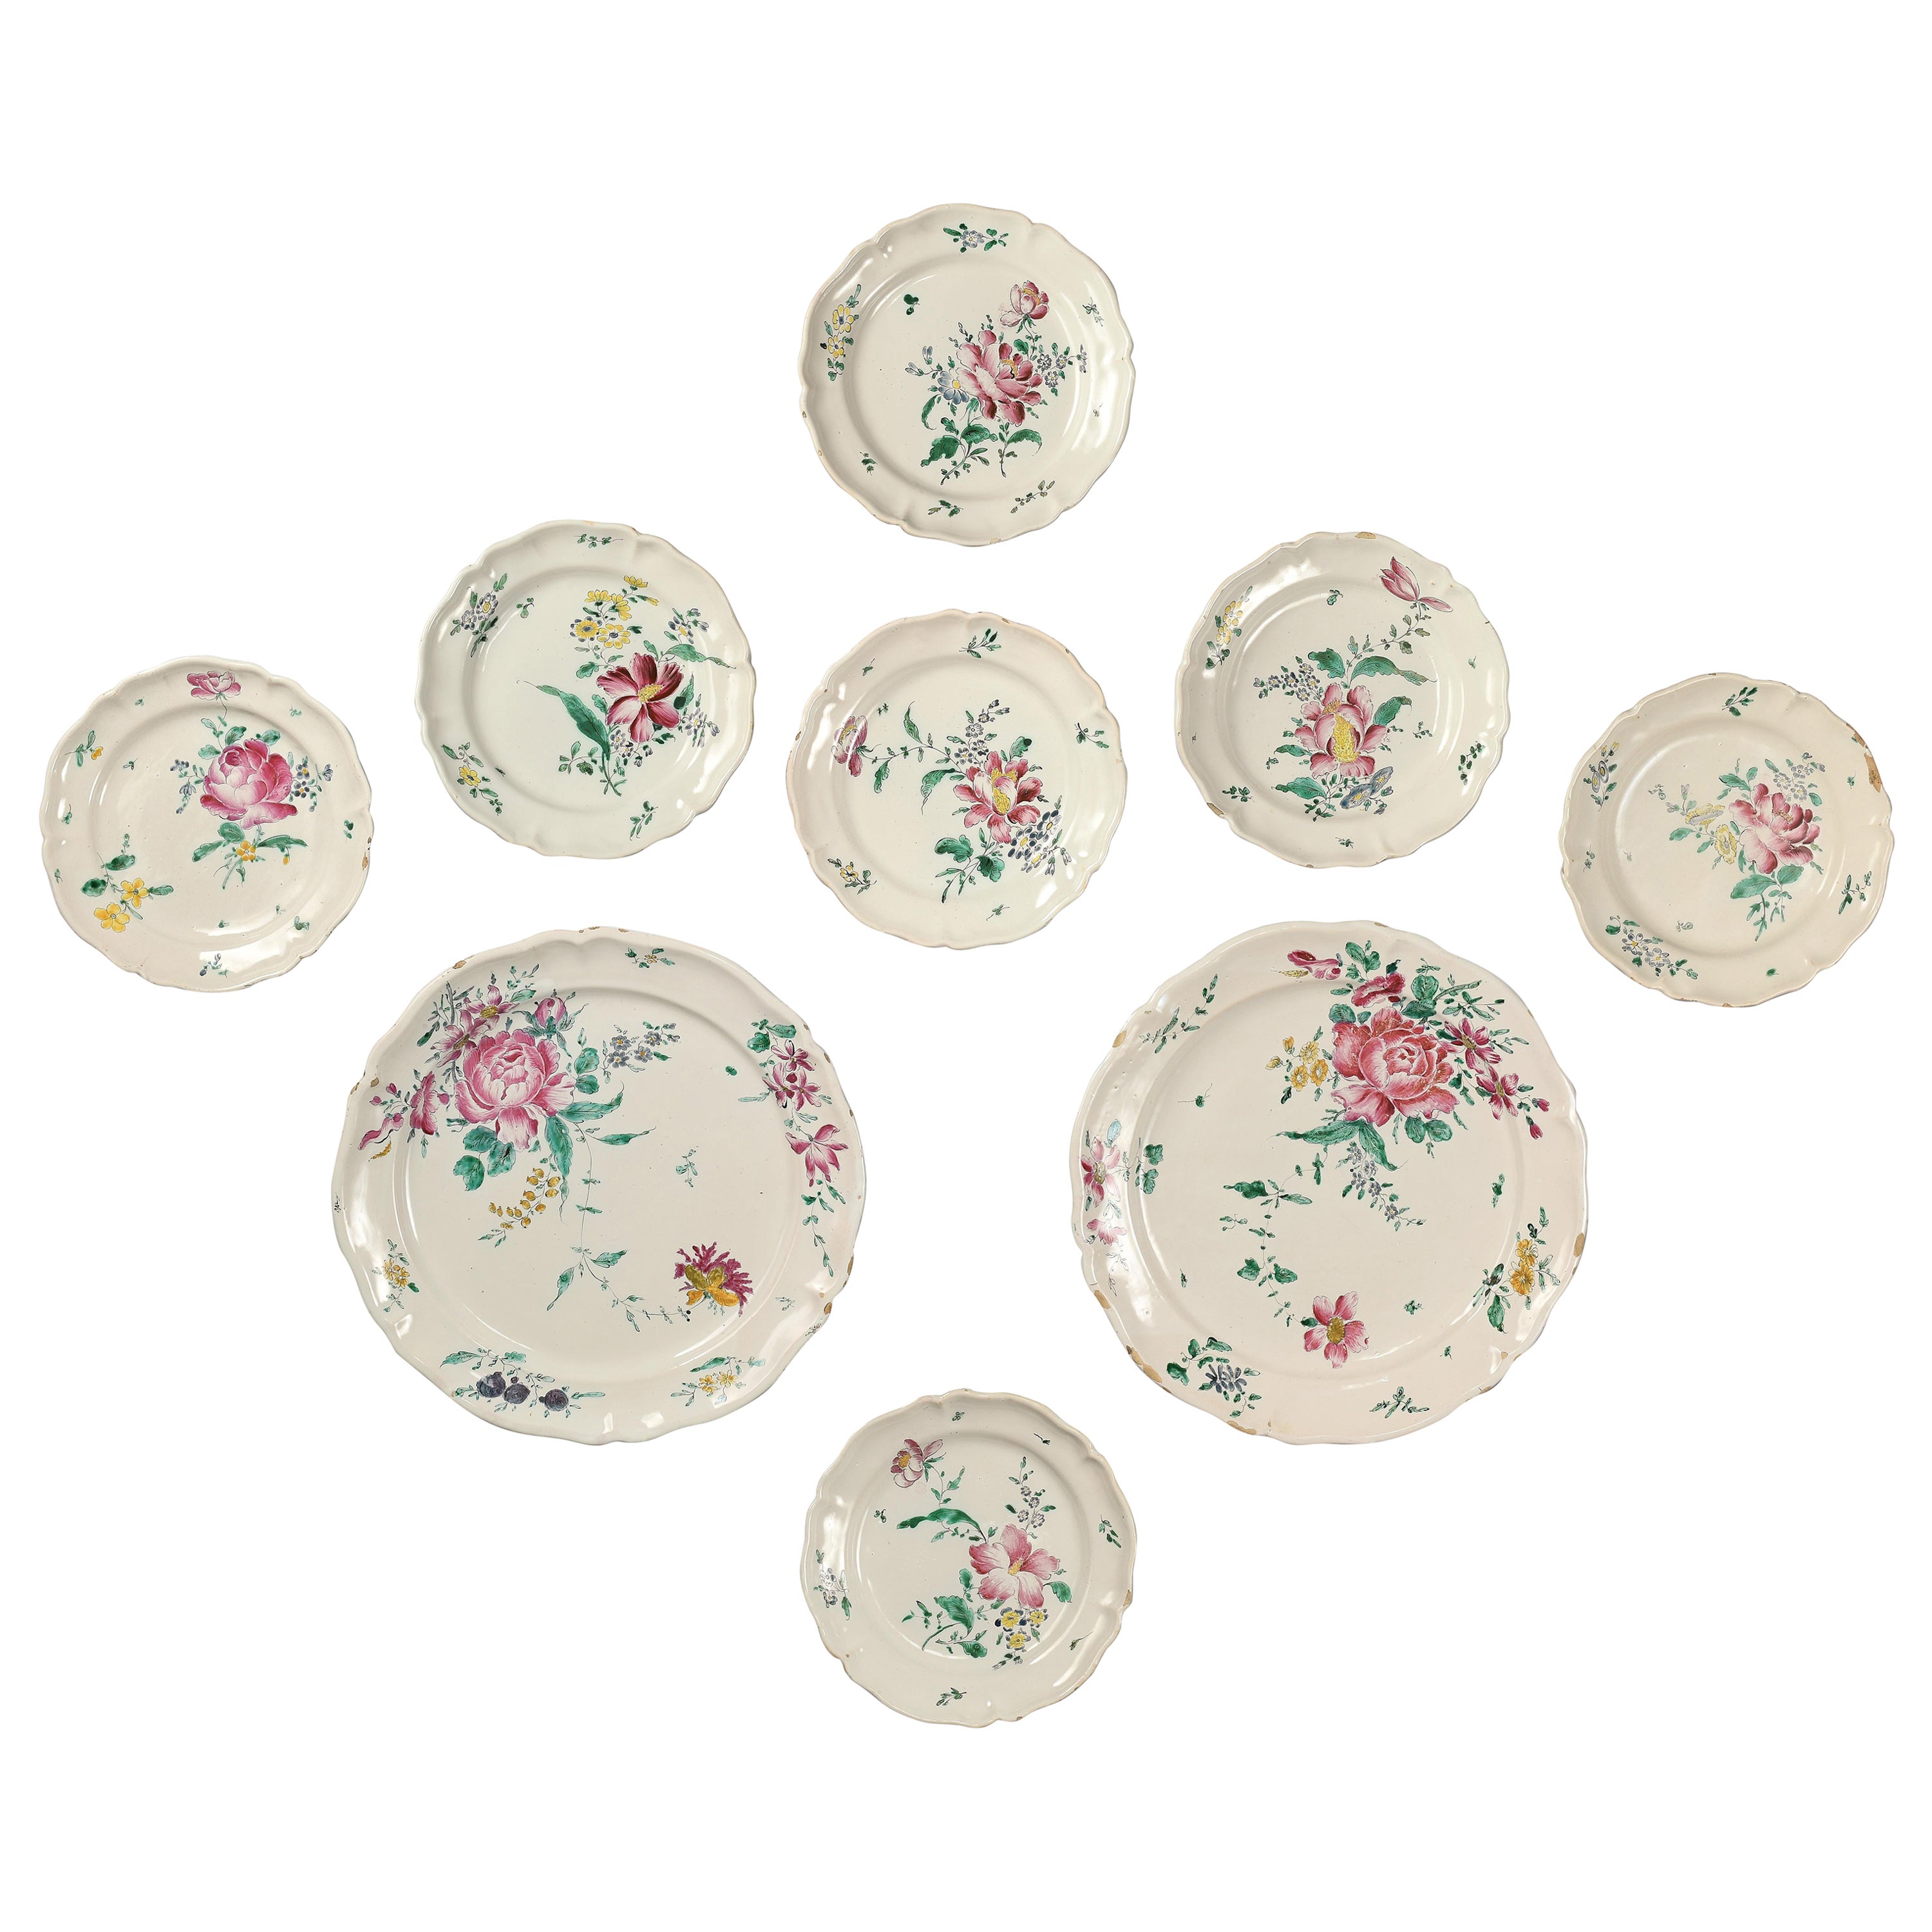 Ancient Maiolica Dishes with flowers, Lombard Manufacture, 1770-1780 Circa